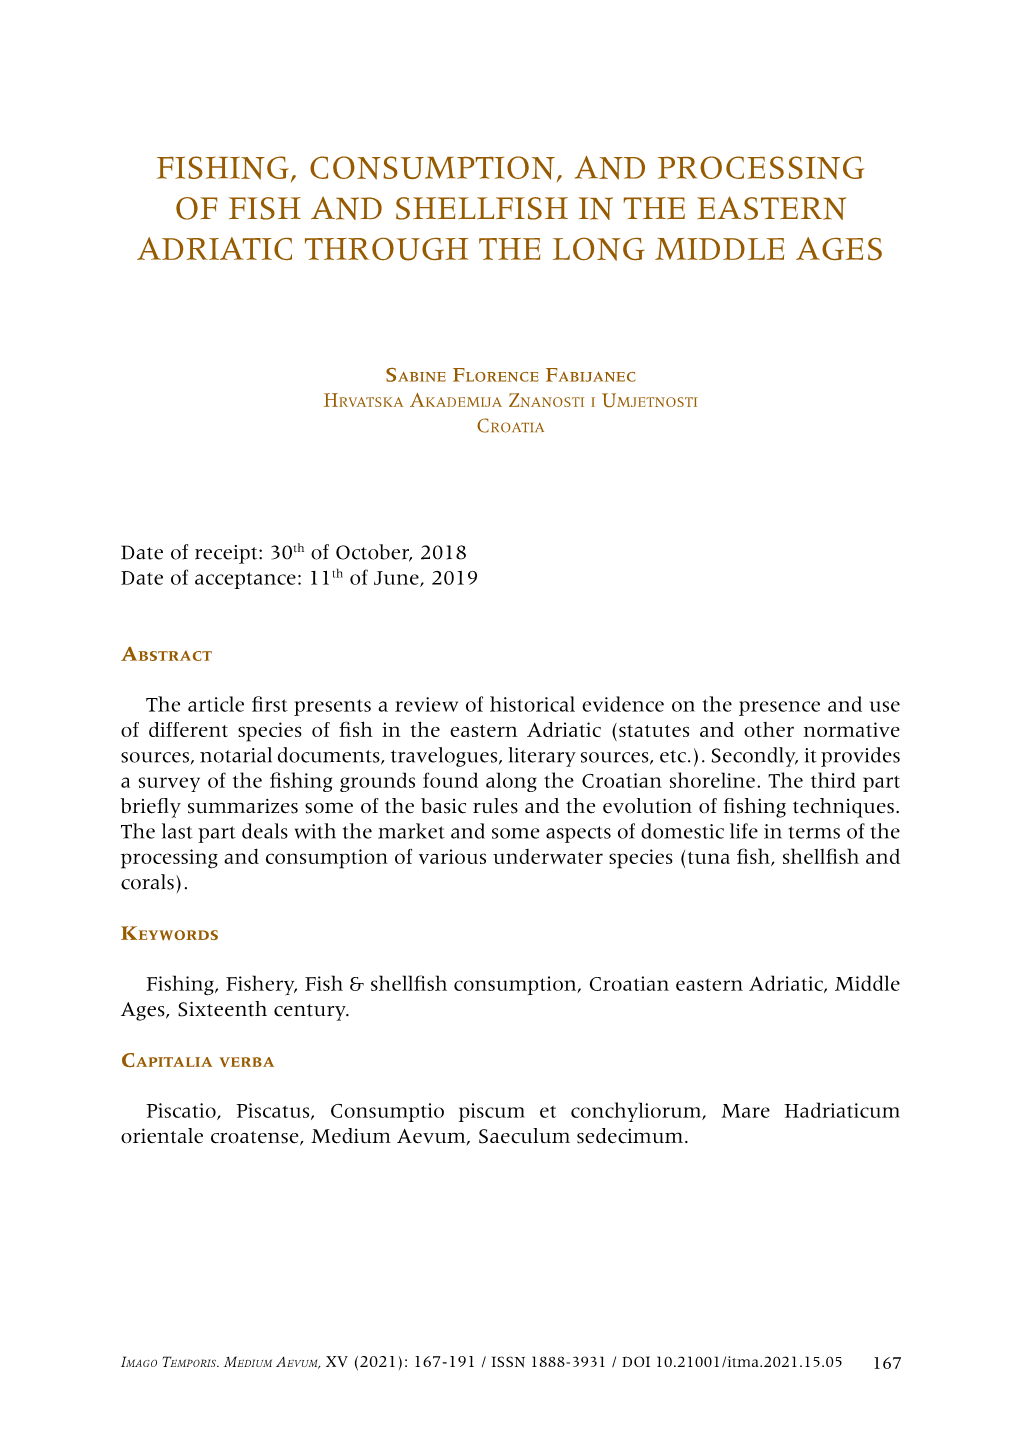 Fishing, Consumption, and Processing of Fish and Shellfish in the Eastern Adriatic Through the Long Middle Ages